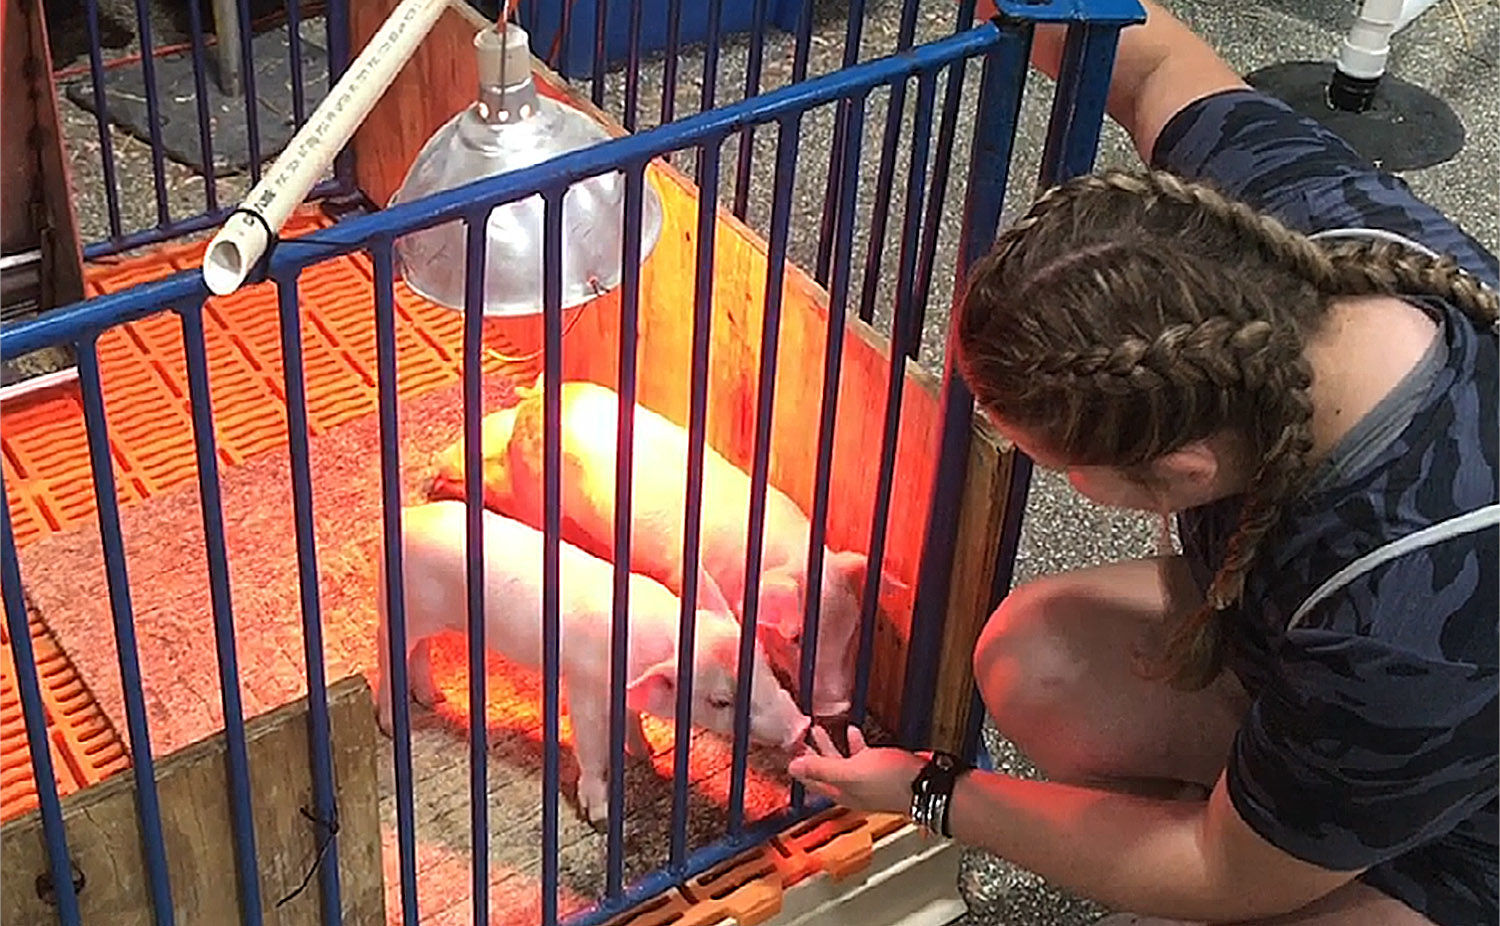 Piglets, 4-H contests draw in McLean County Fair crowd pic